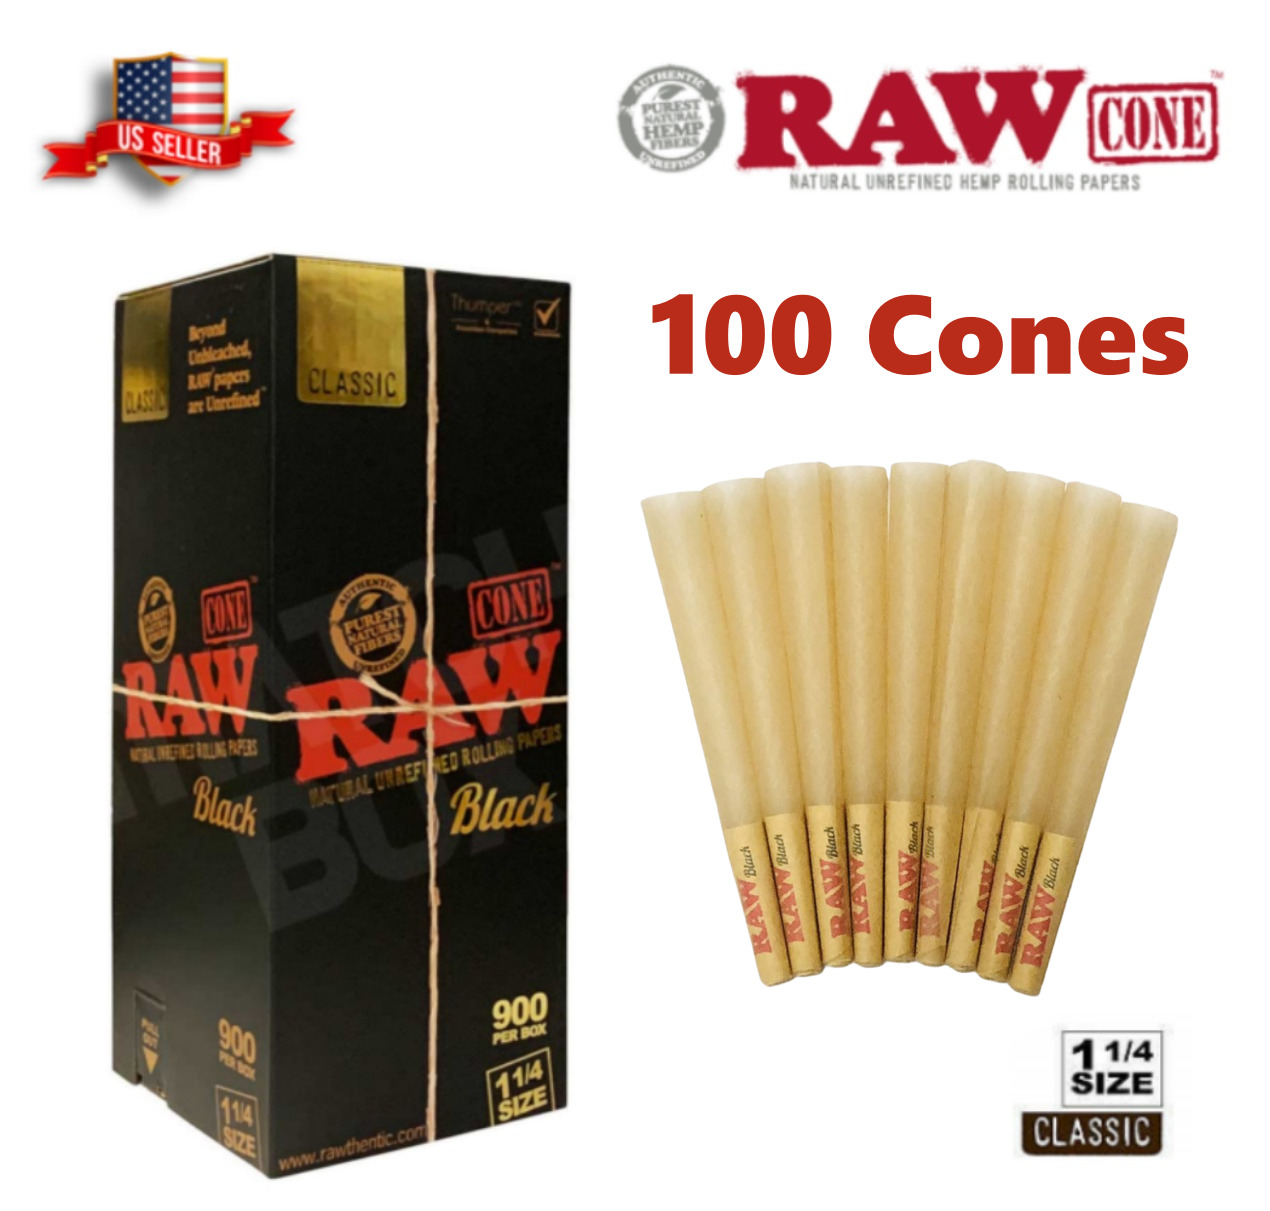 Authentic RAW Black 1 1/4 Size Pre-Rolled Cone 100 Pack & Fast Shipping US